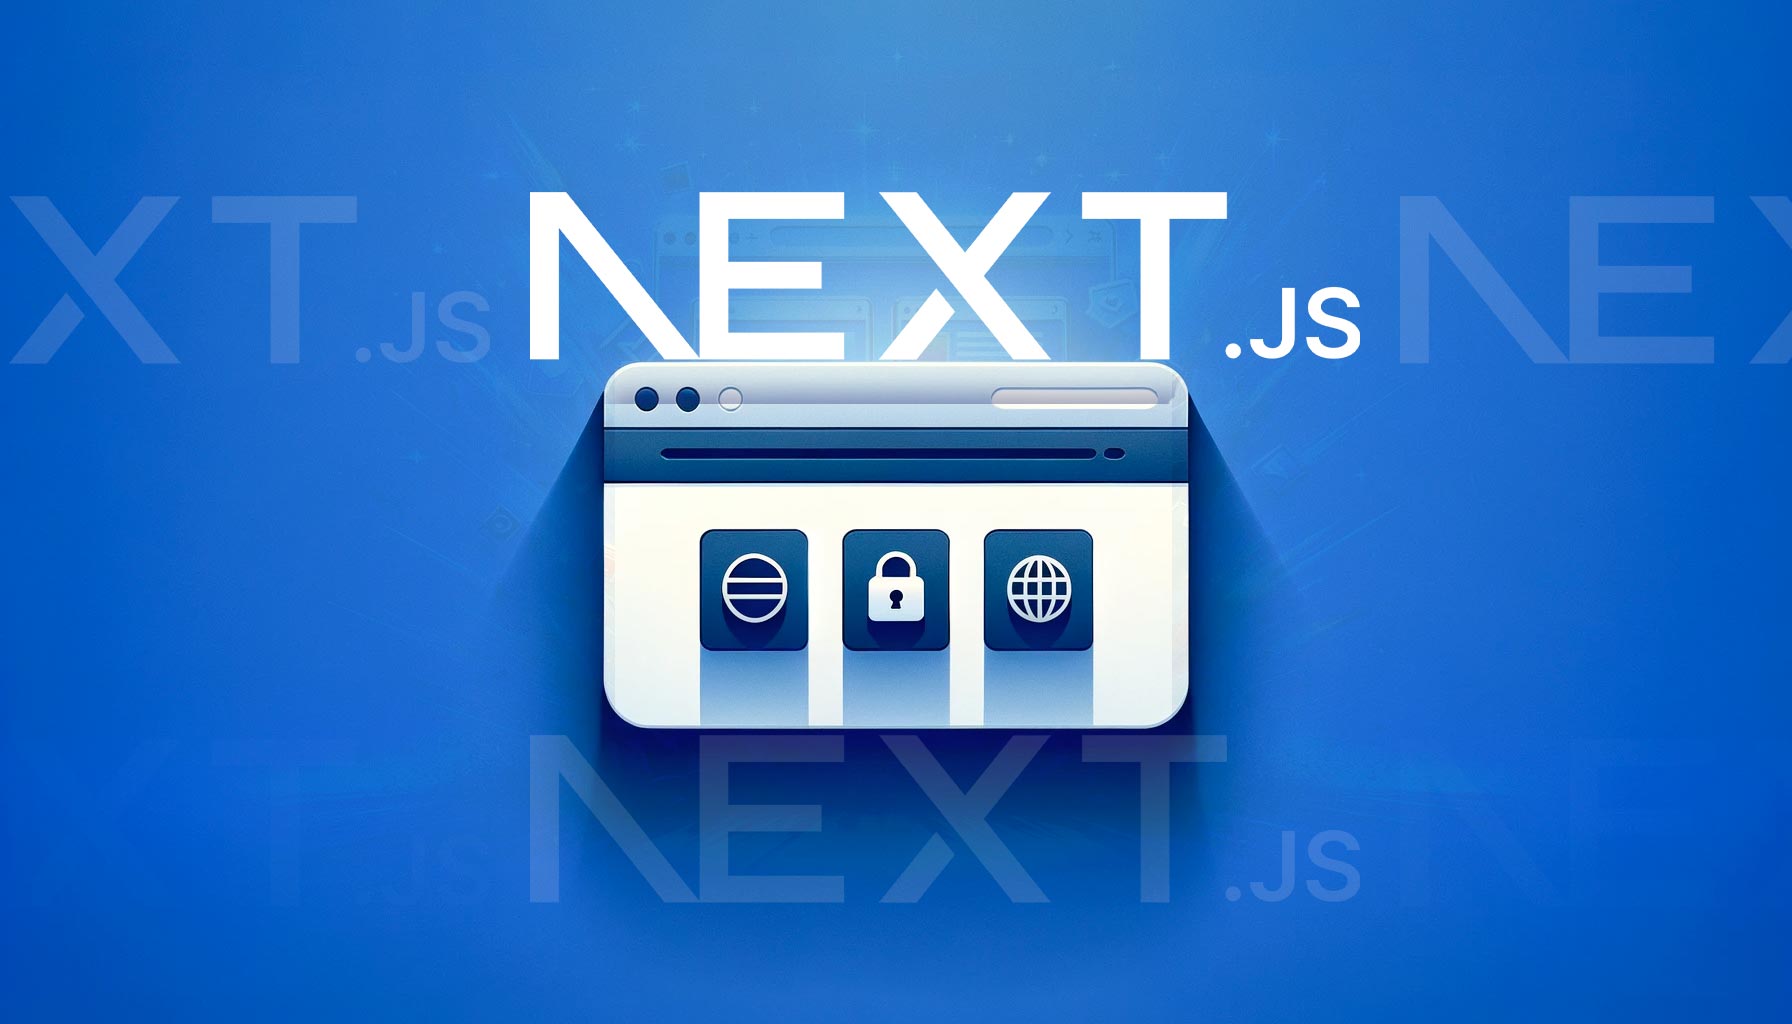 Best Practices for Security in Next.js